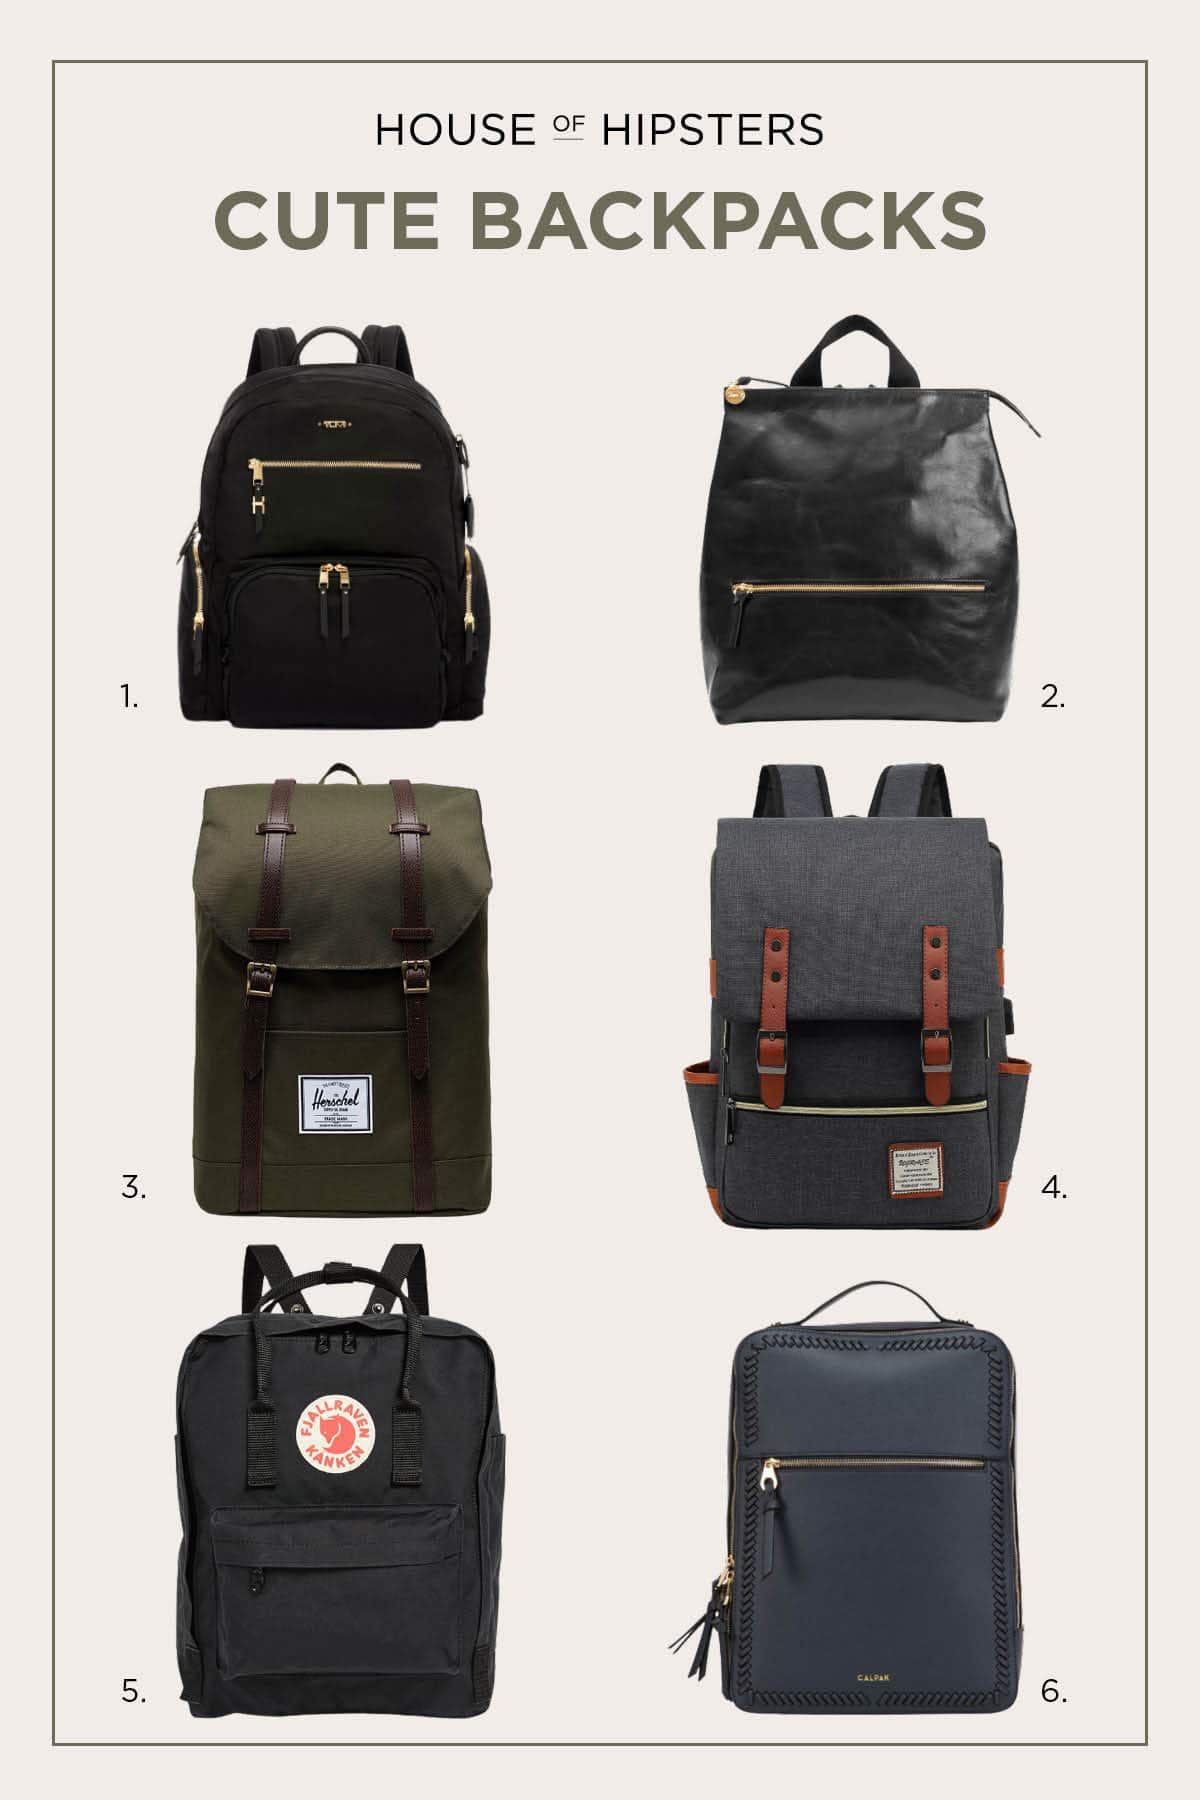 12 Cute Backpacks for work, school, and travel